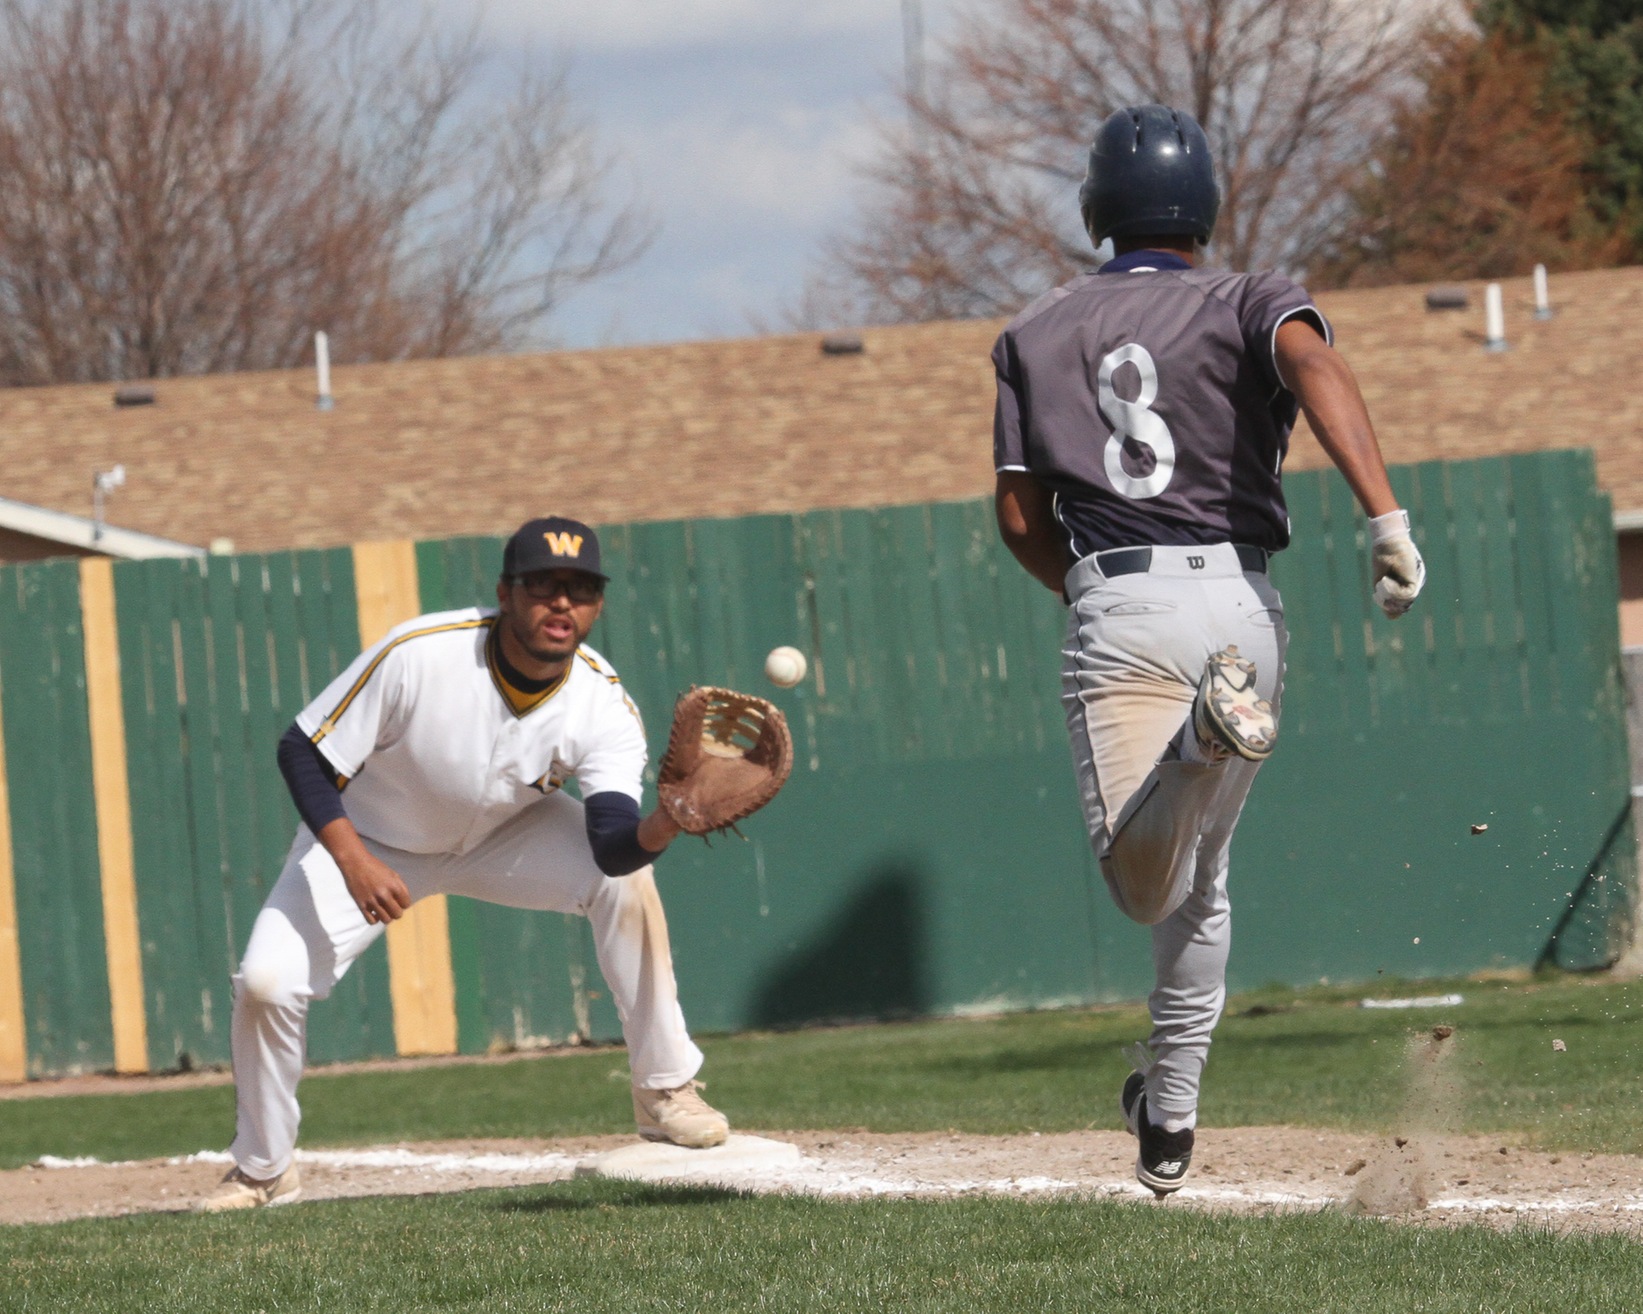 WNCC baseball stays unbeaten in conference, sweeps Otero on Sunday